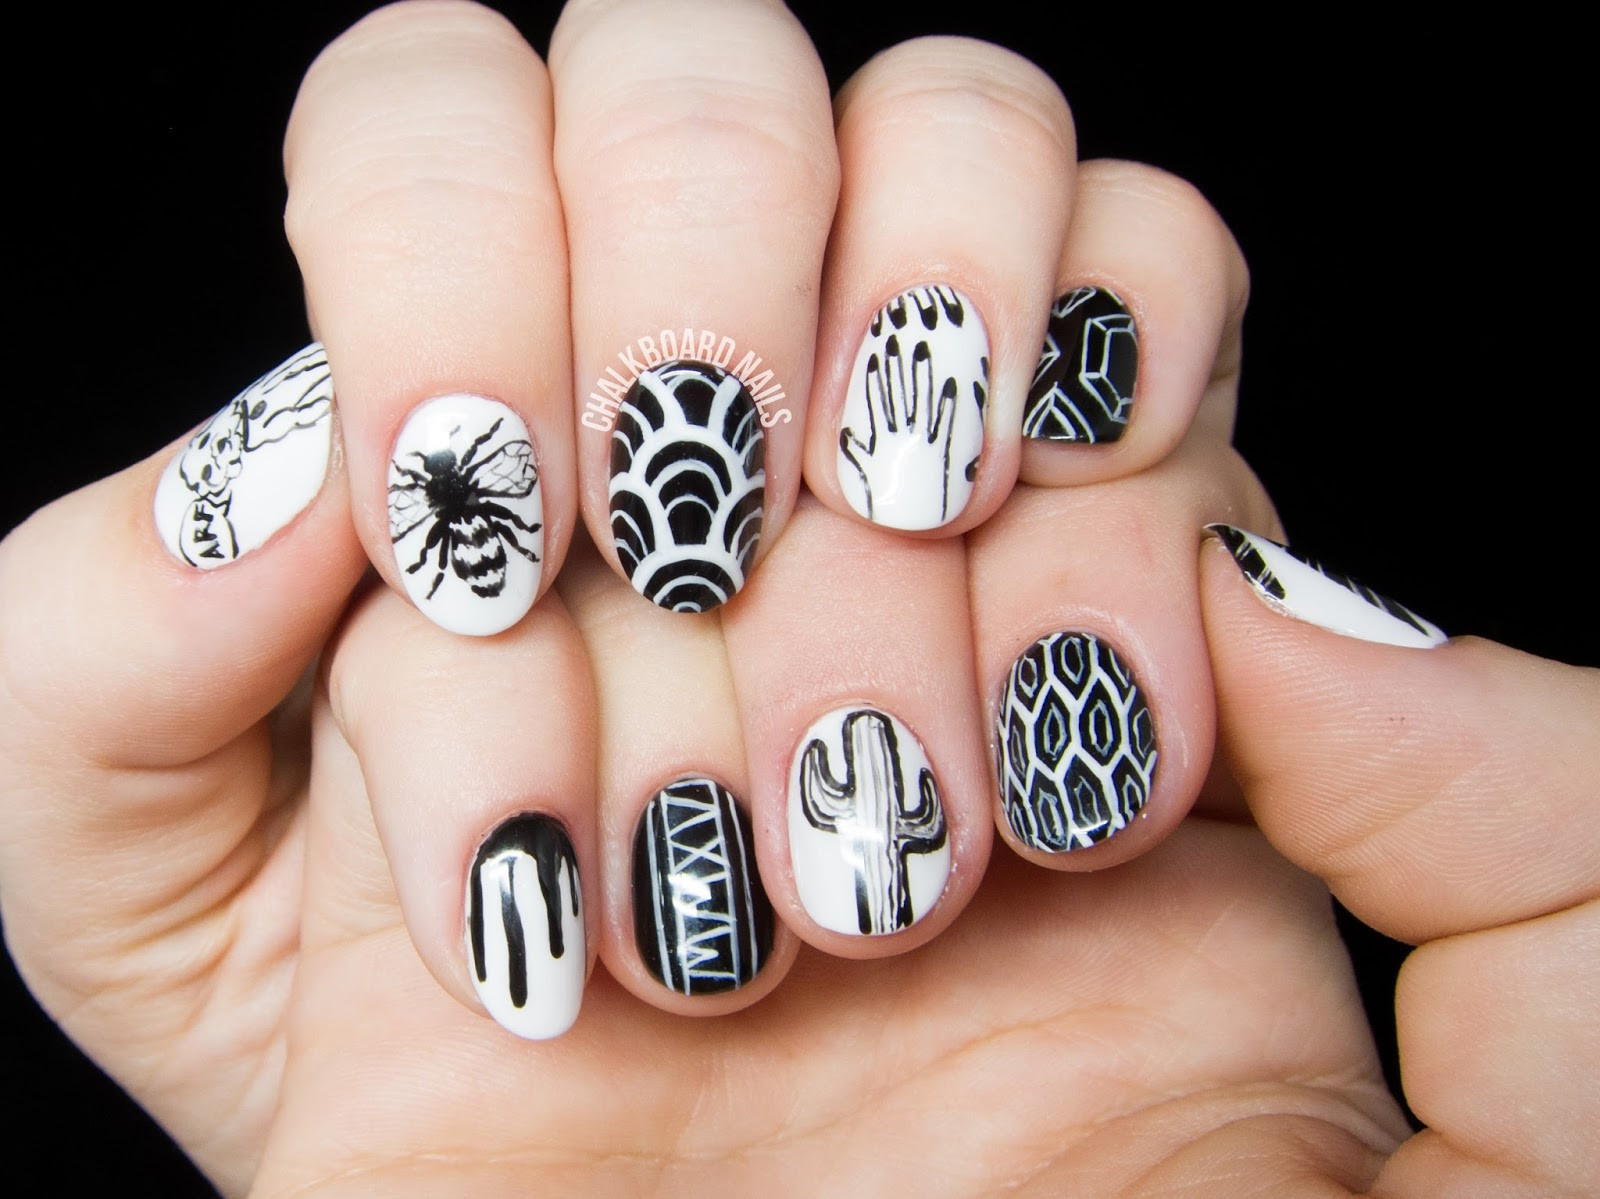 Freehand Nail Art
 Personalized Black and White Freehand Nail Art